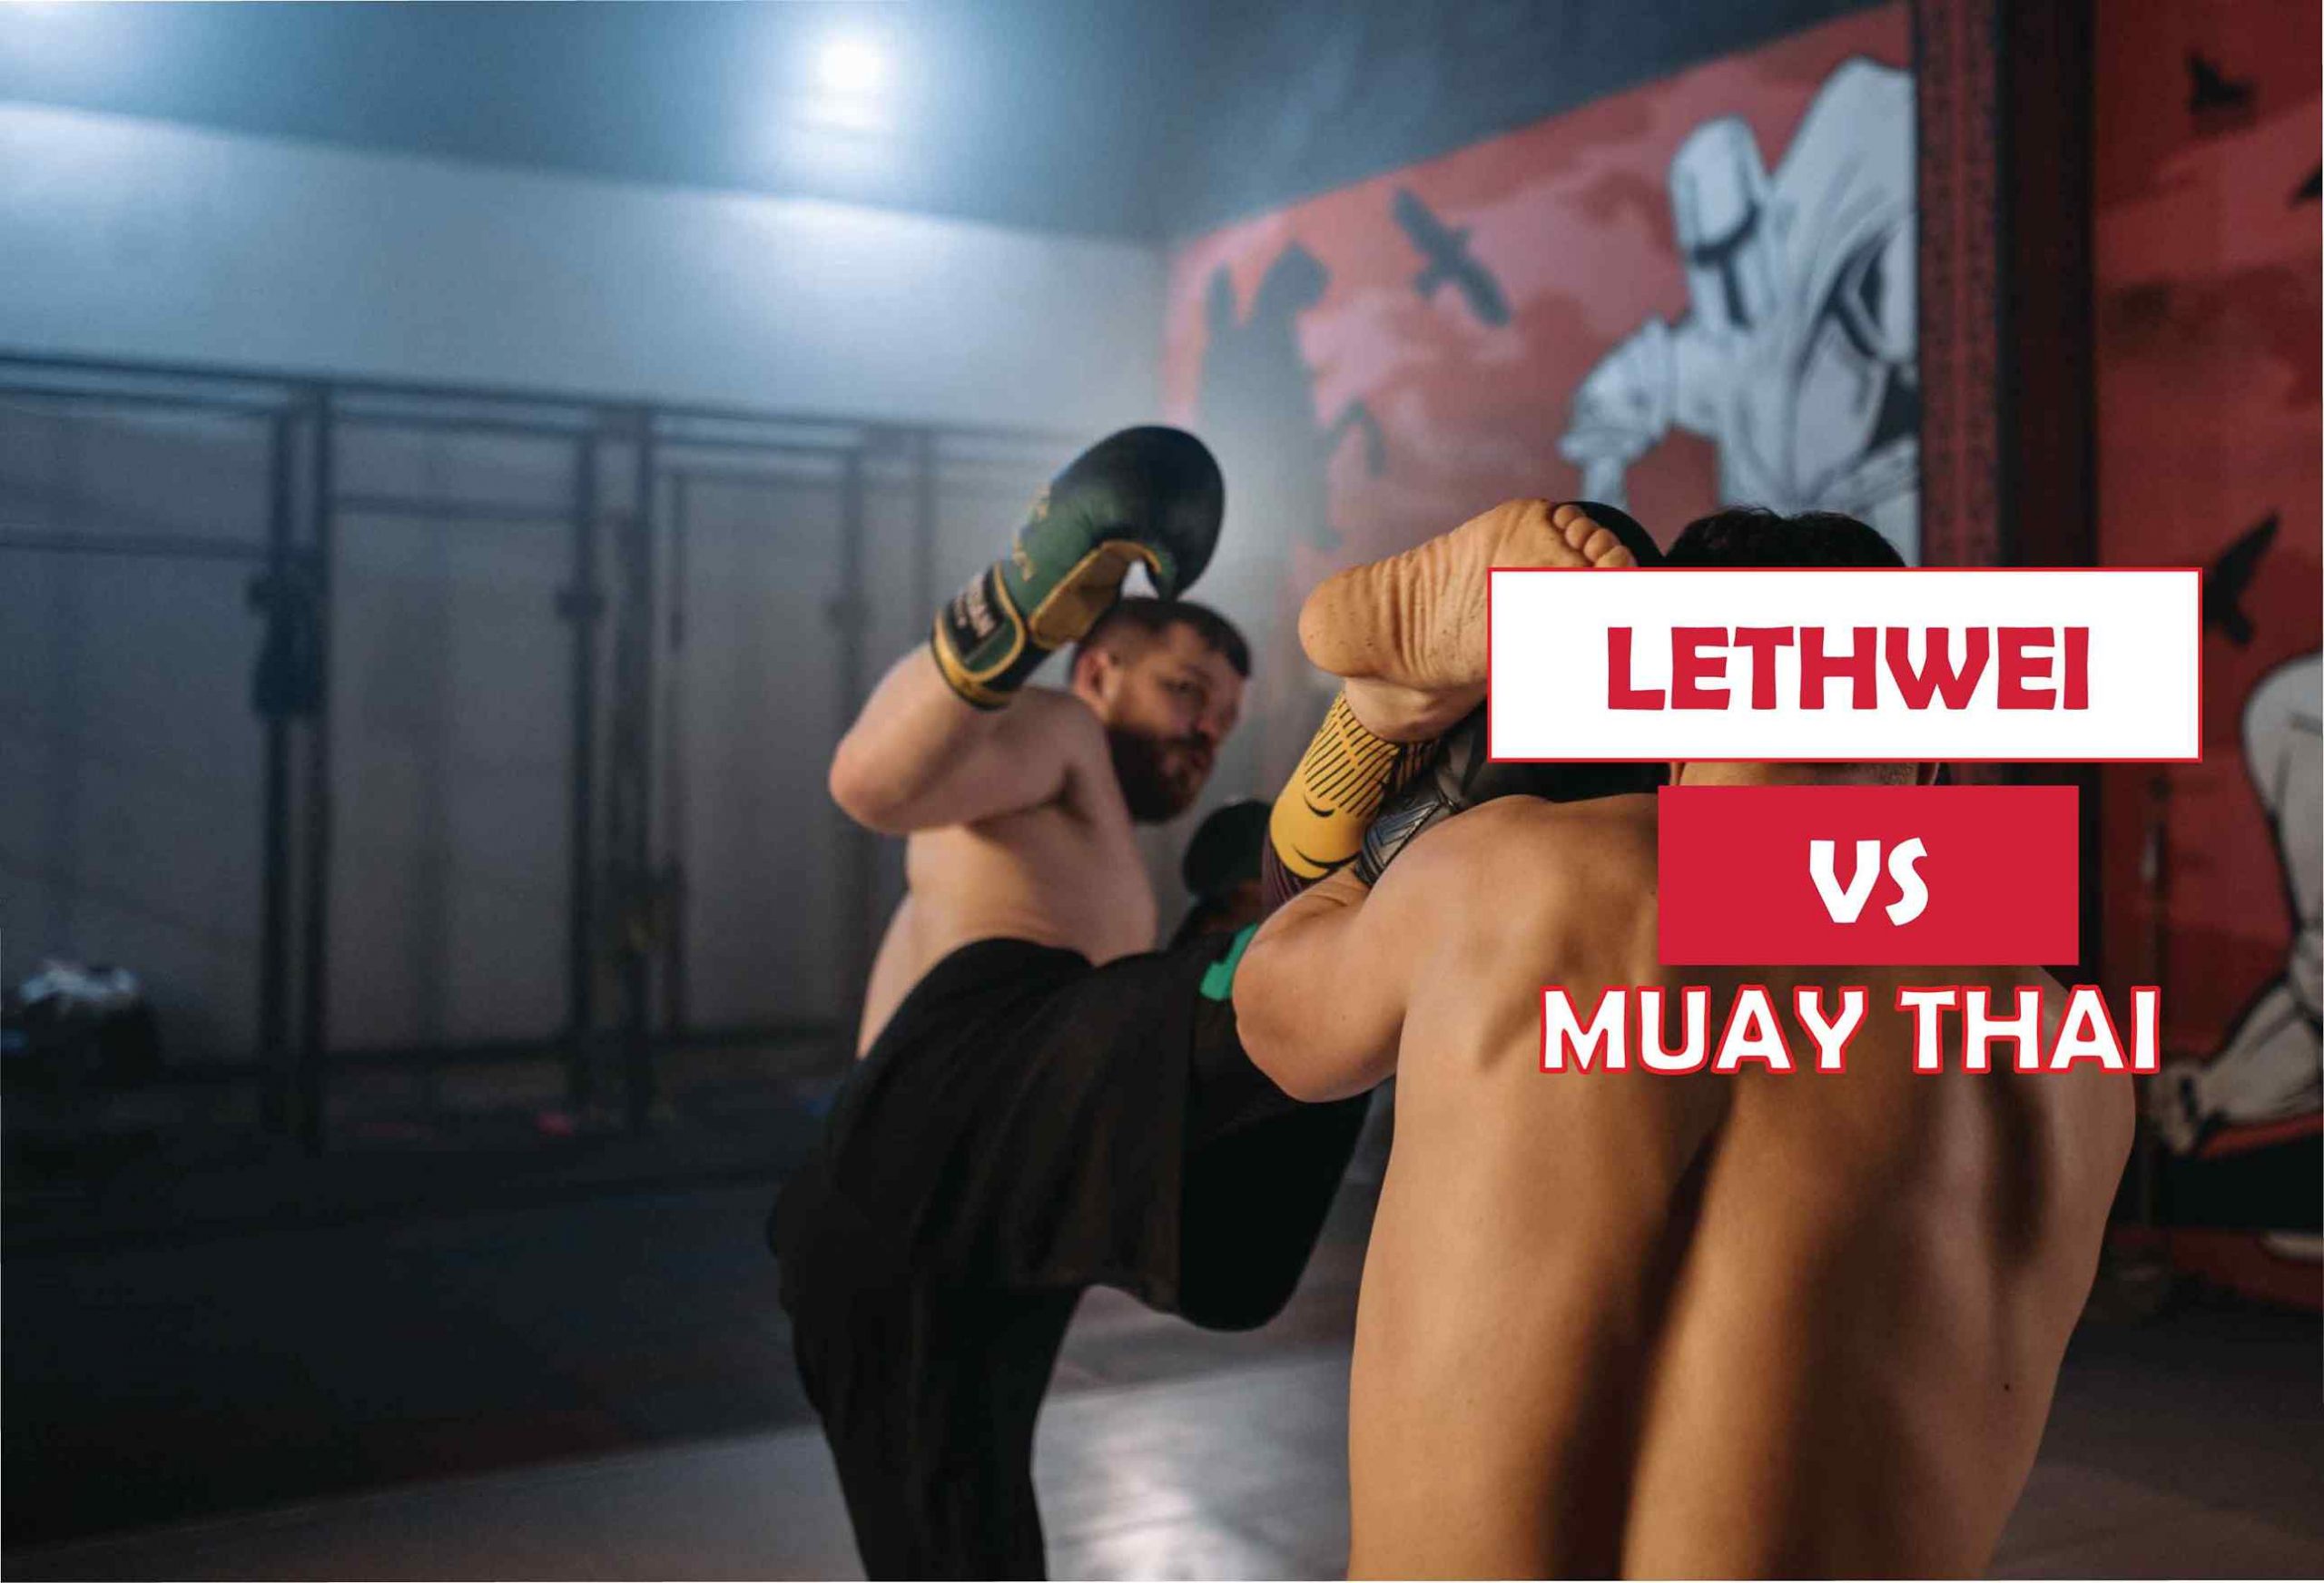 Lethwei Vs Muay Thai - Which Is More Effective?